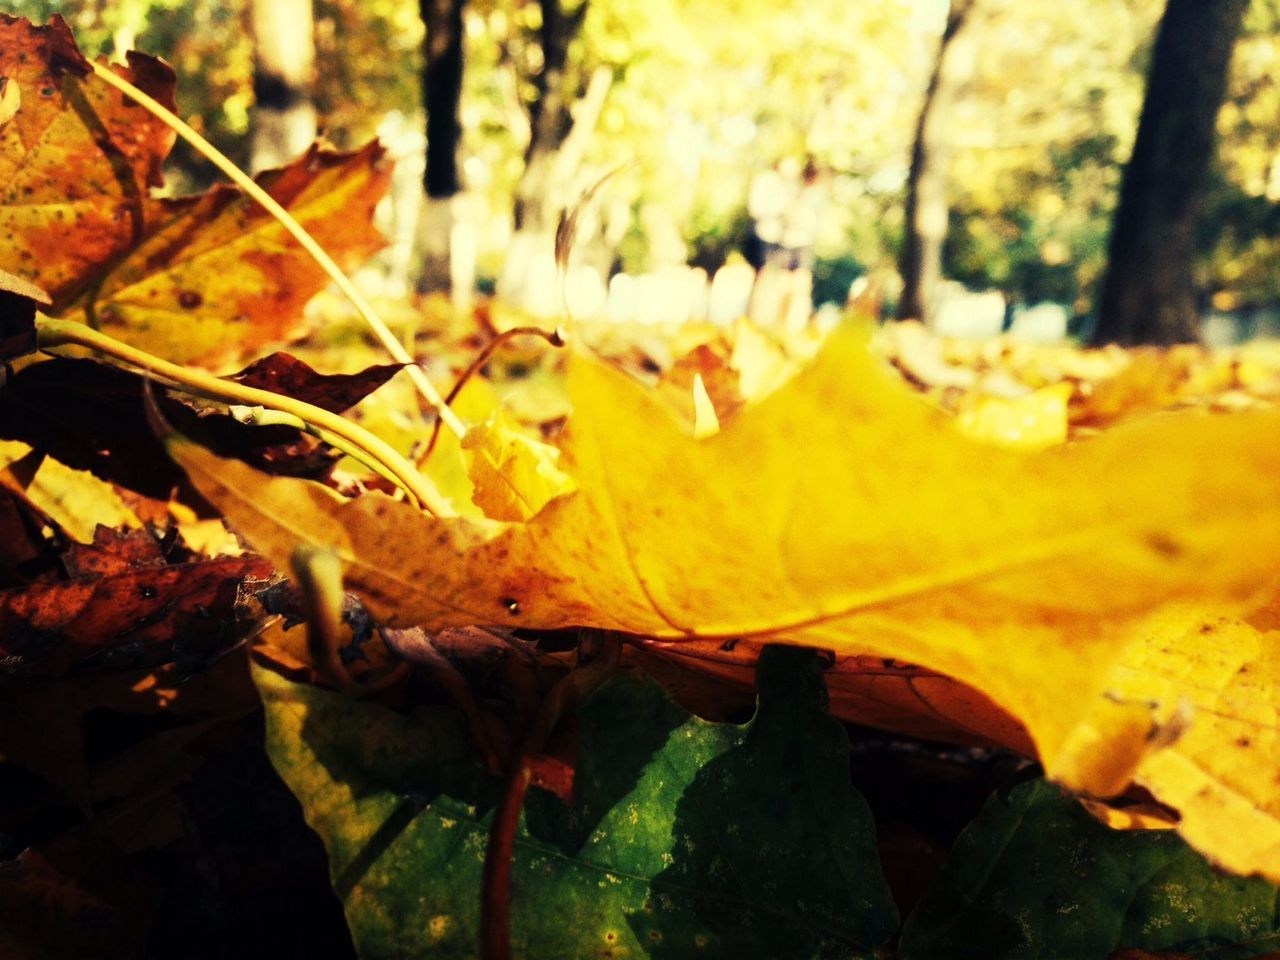 yellow, close-up, autumn, focus on foreground, leaf, change, season, nature, orange color, selective focus, growth, dry, beauty in nature, outdoors, fragility, leaves, day, plant, no people, fallen